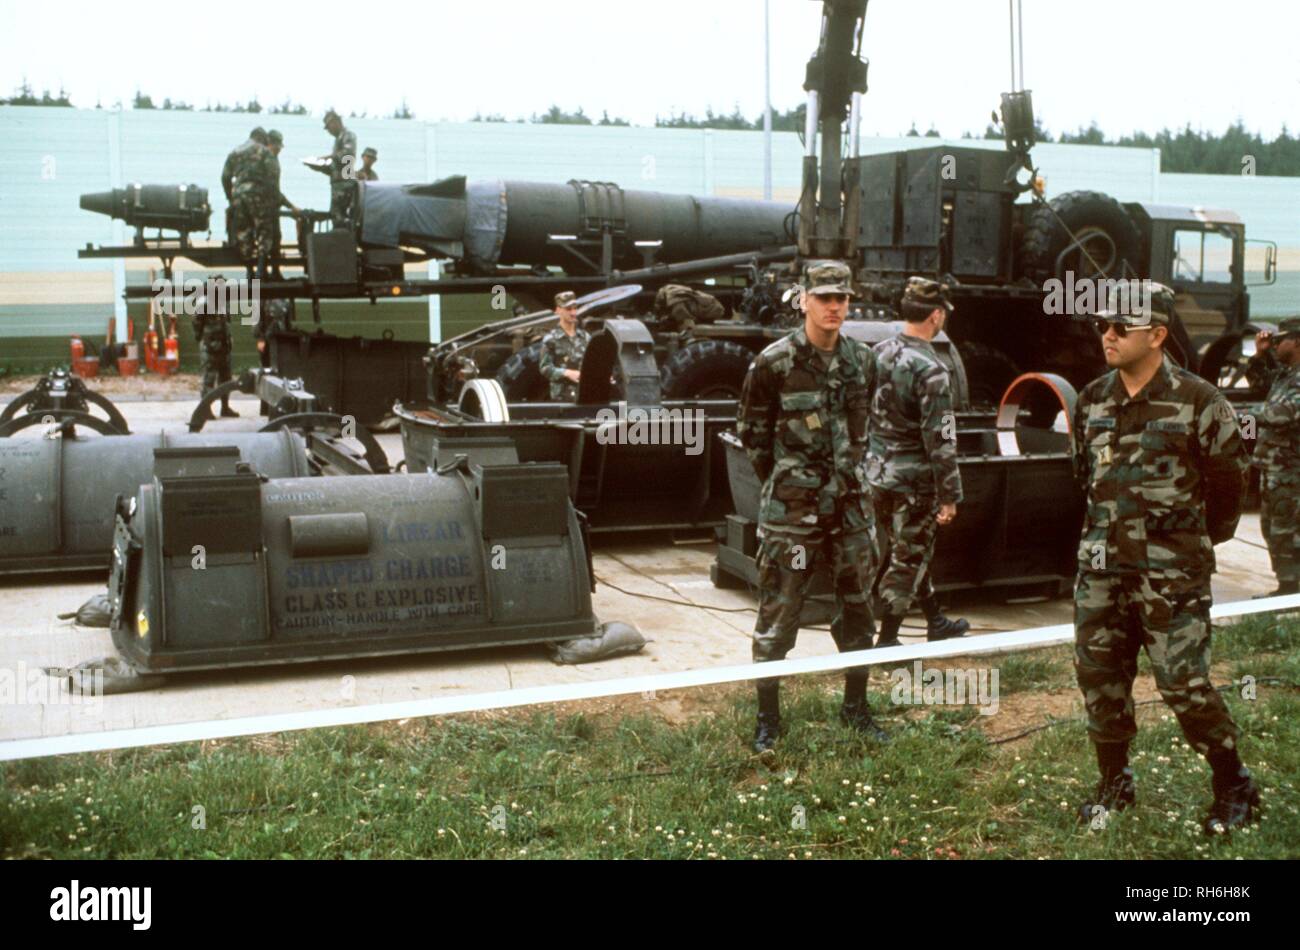 US soldiers in front of a Pershing II rocket in the Swabian Mutlangen. The US Armed Forces opened the American nuclear missile depot in Mutlangen for the international press for the first time on 8 June 1988. A few weeks before the departure of the atomic missile strike rockets from the Federal Republic of Germany, around 200 journalists were guided through the secured area. In addition to the inspection of a Pershing II rocket was also demonstrated how the rockets are to be dismantled and destroyed after their removal to the United States. The disarmament takes place within the framework of t Stock Photo